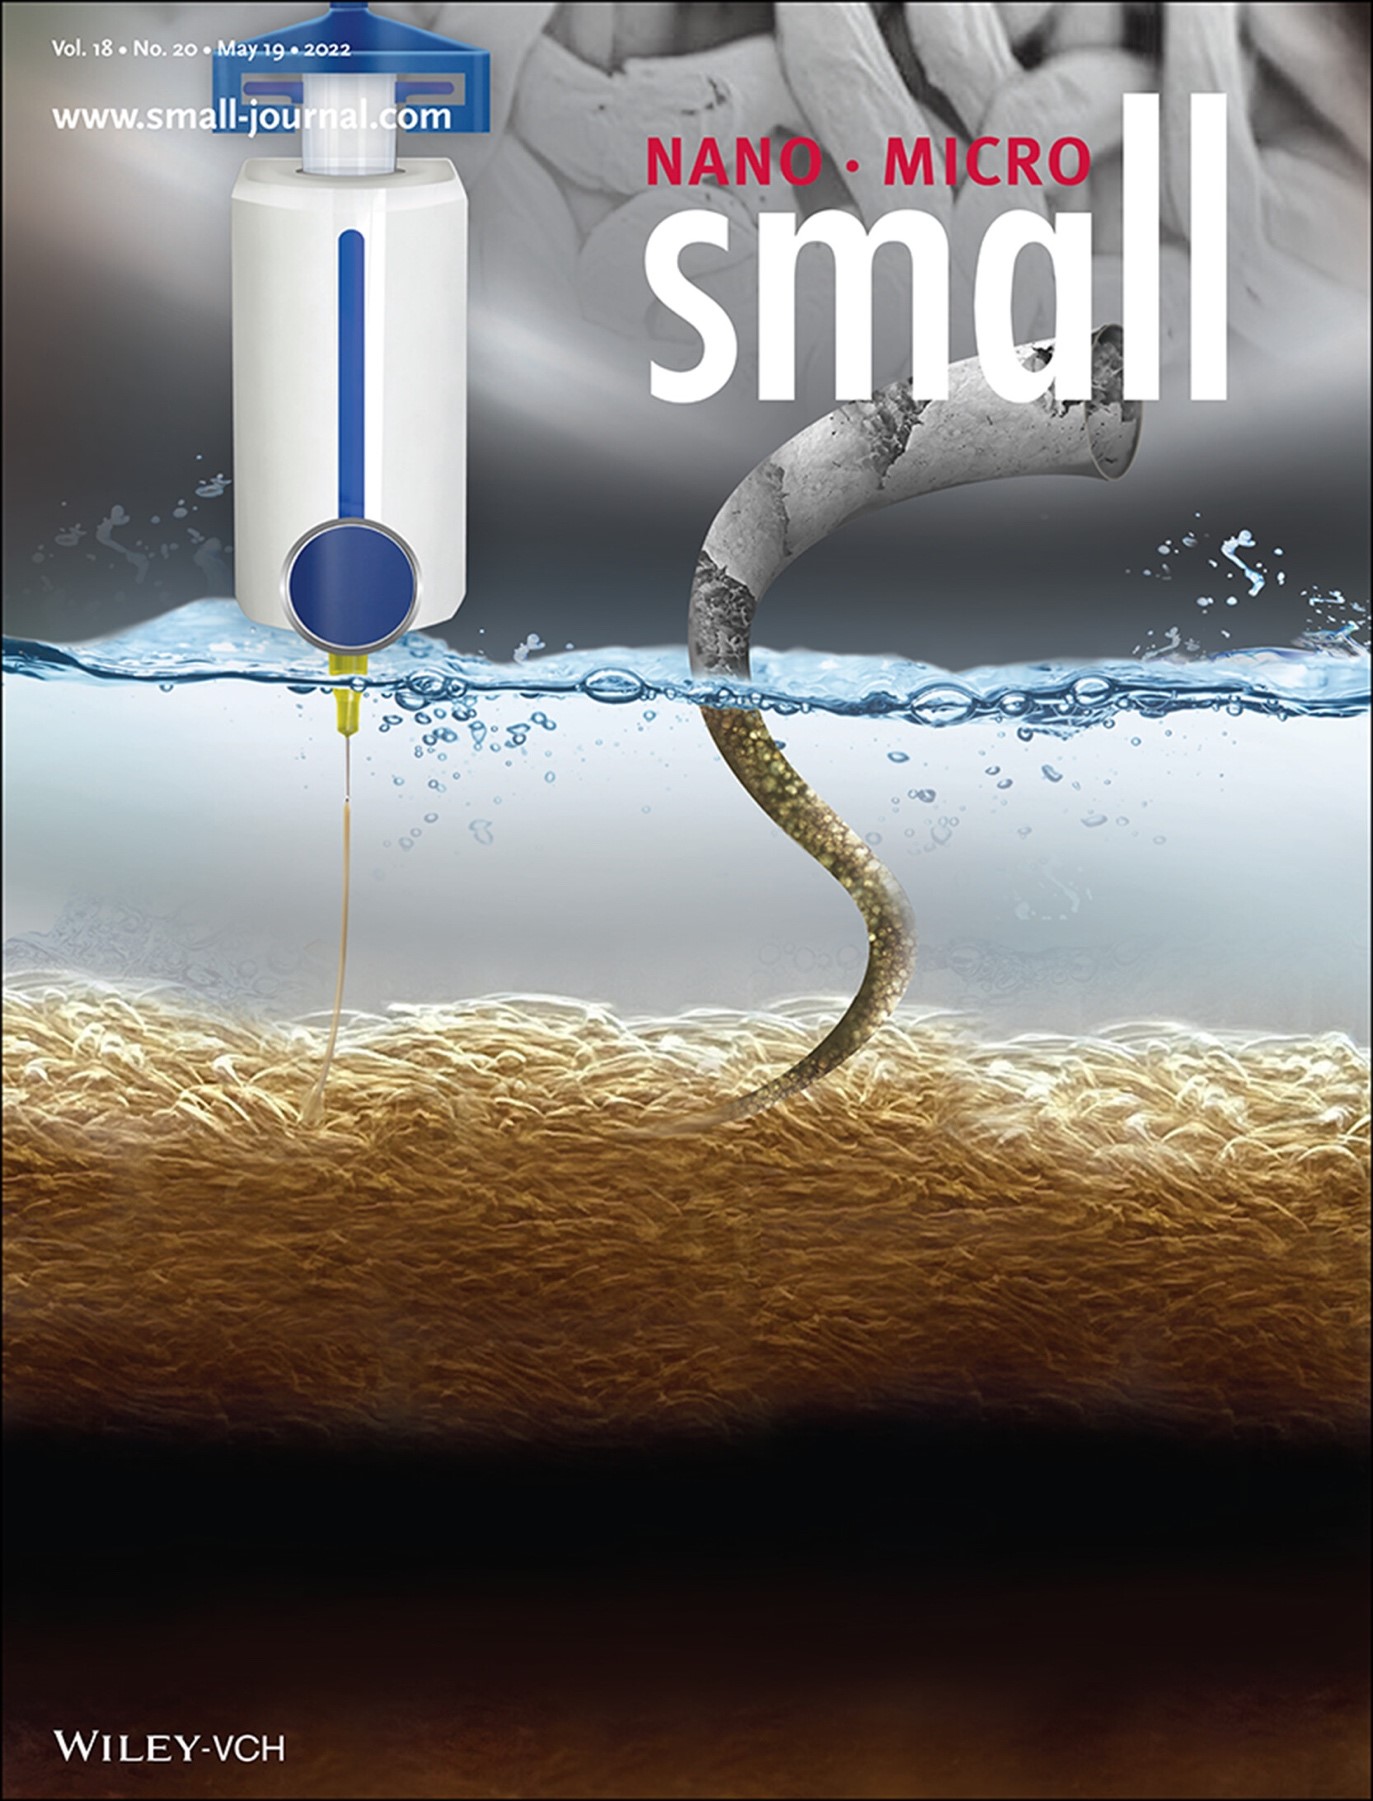 The cover of the May 19th 2022 edition of Nano Micro Small journal